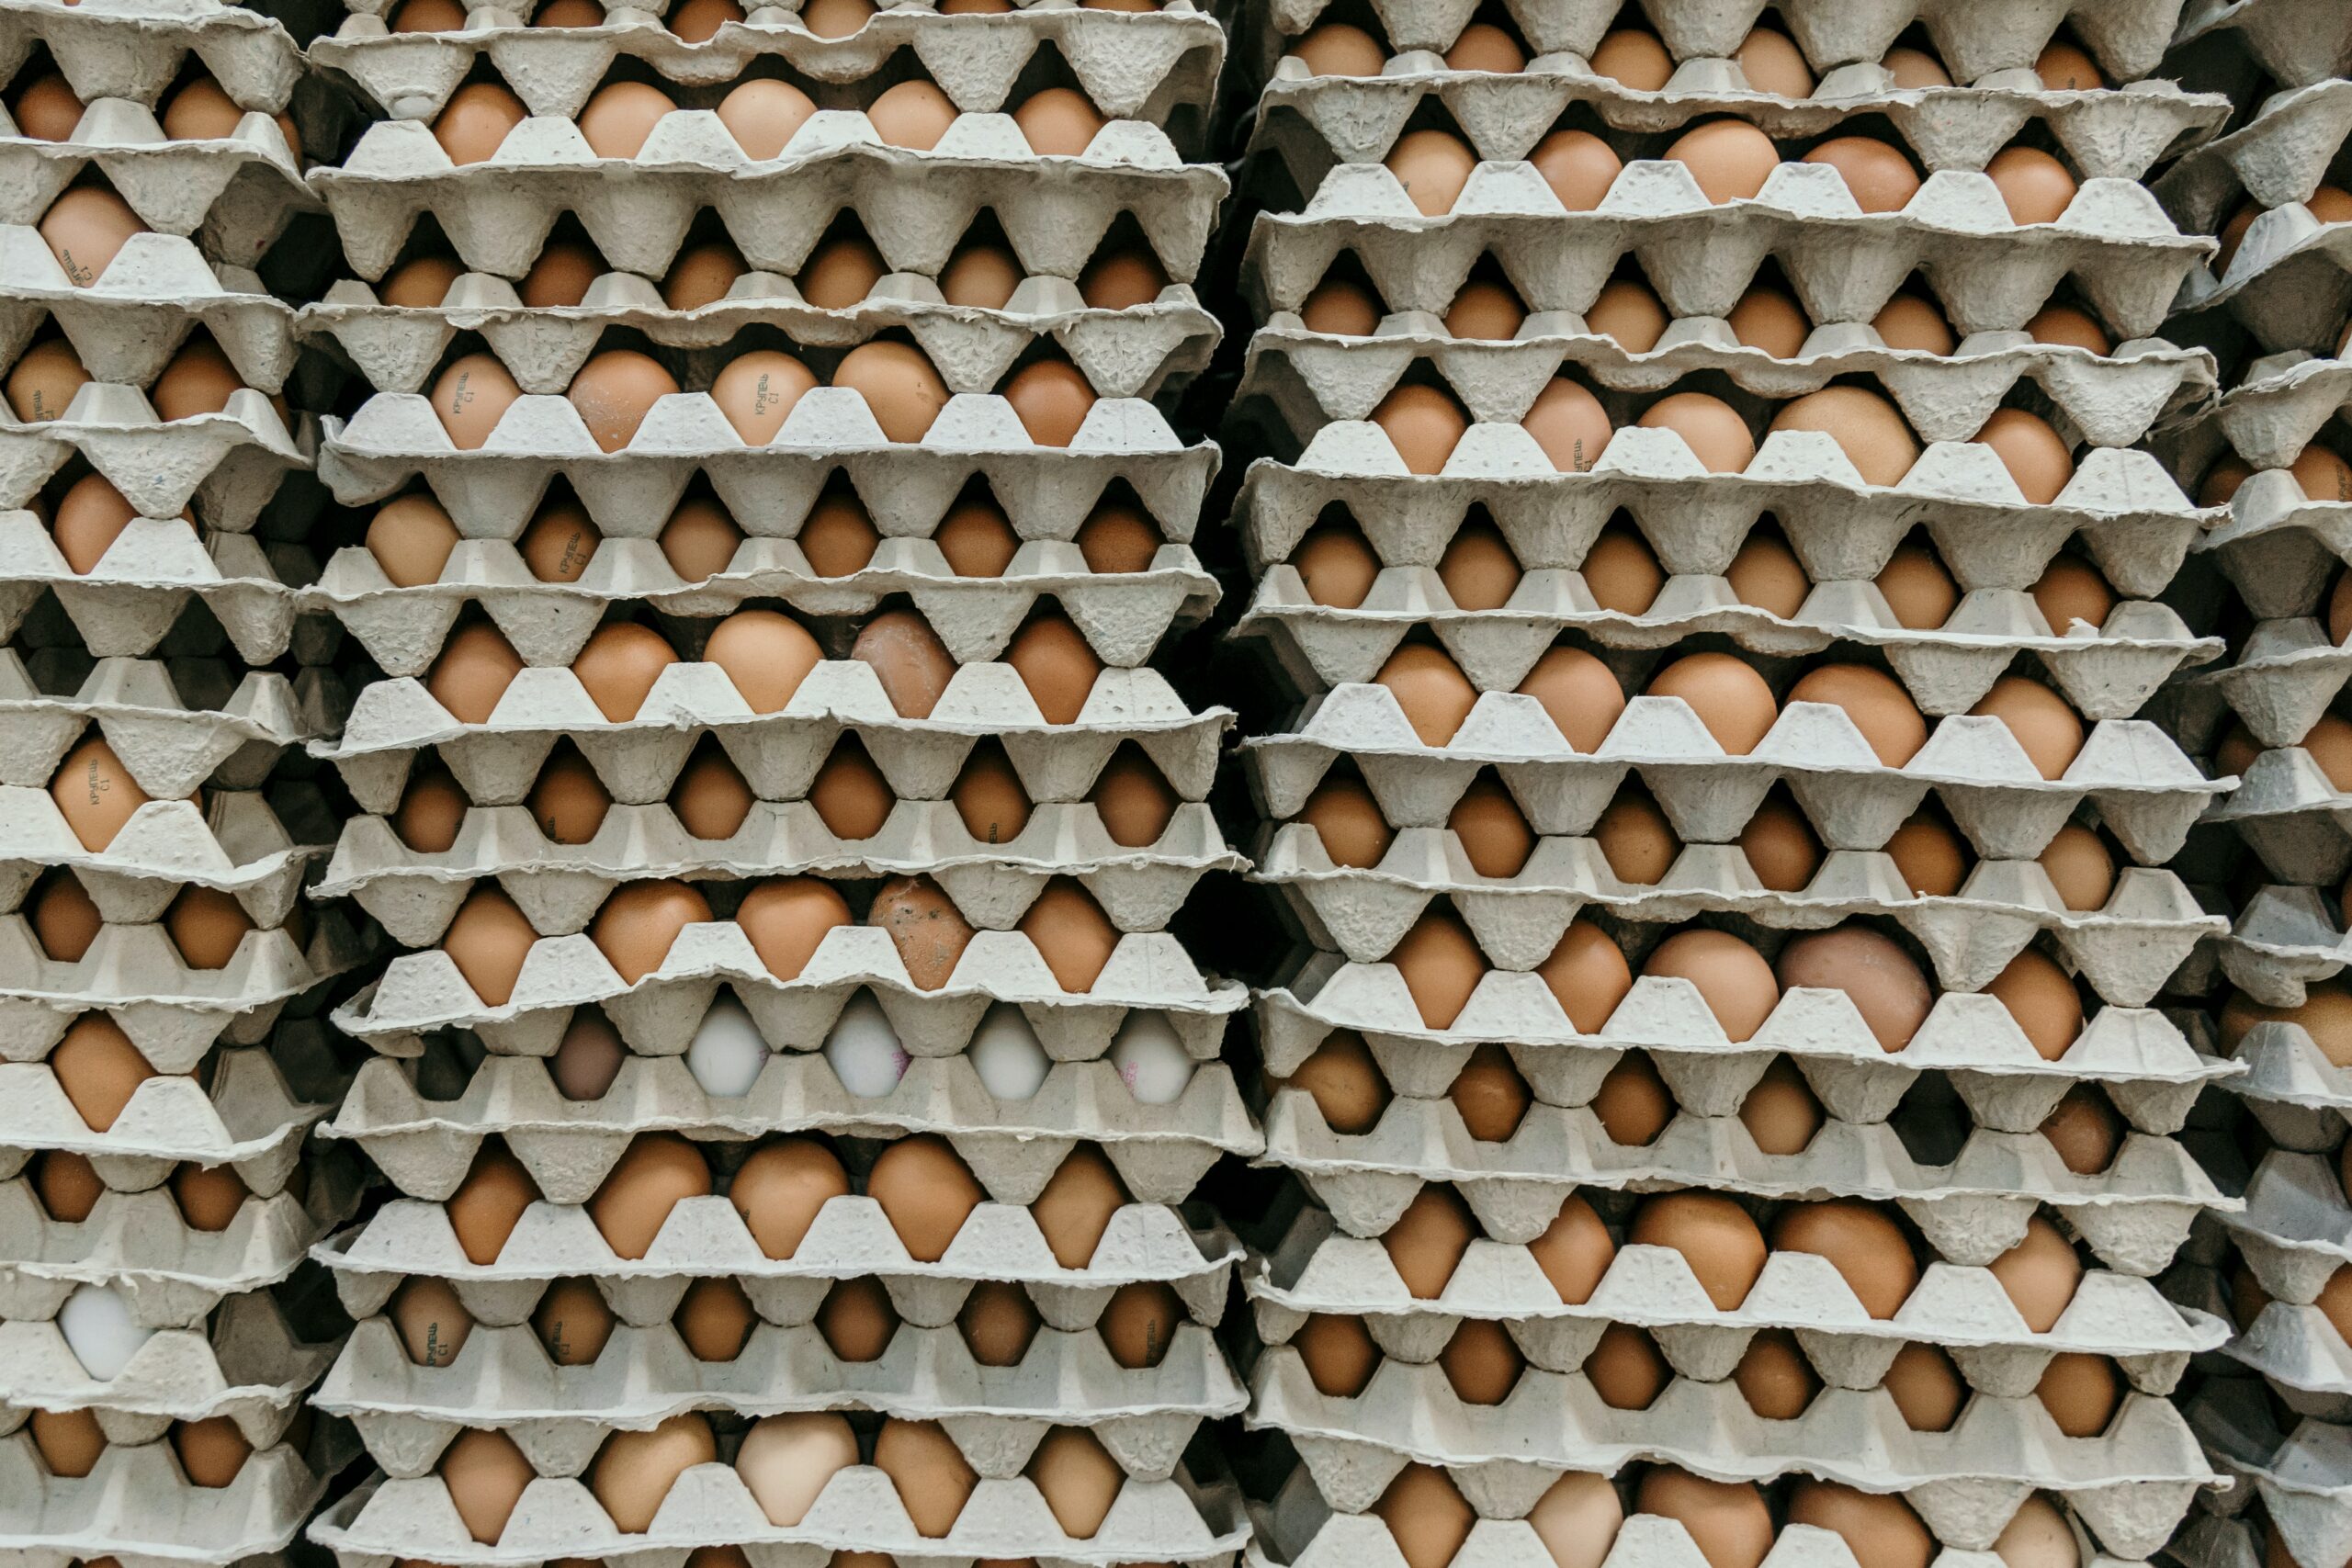 Rising costs and EU imports: the fallout of the UK egg shortage